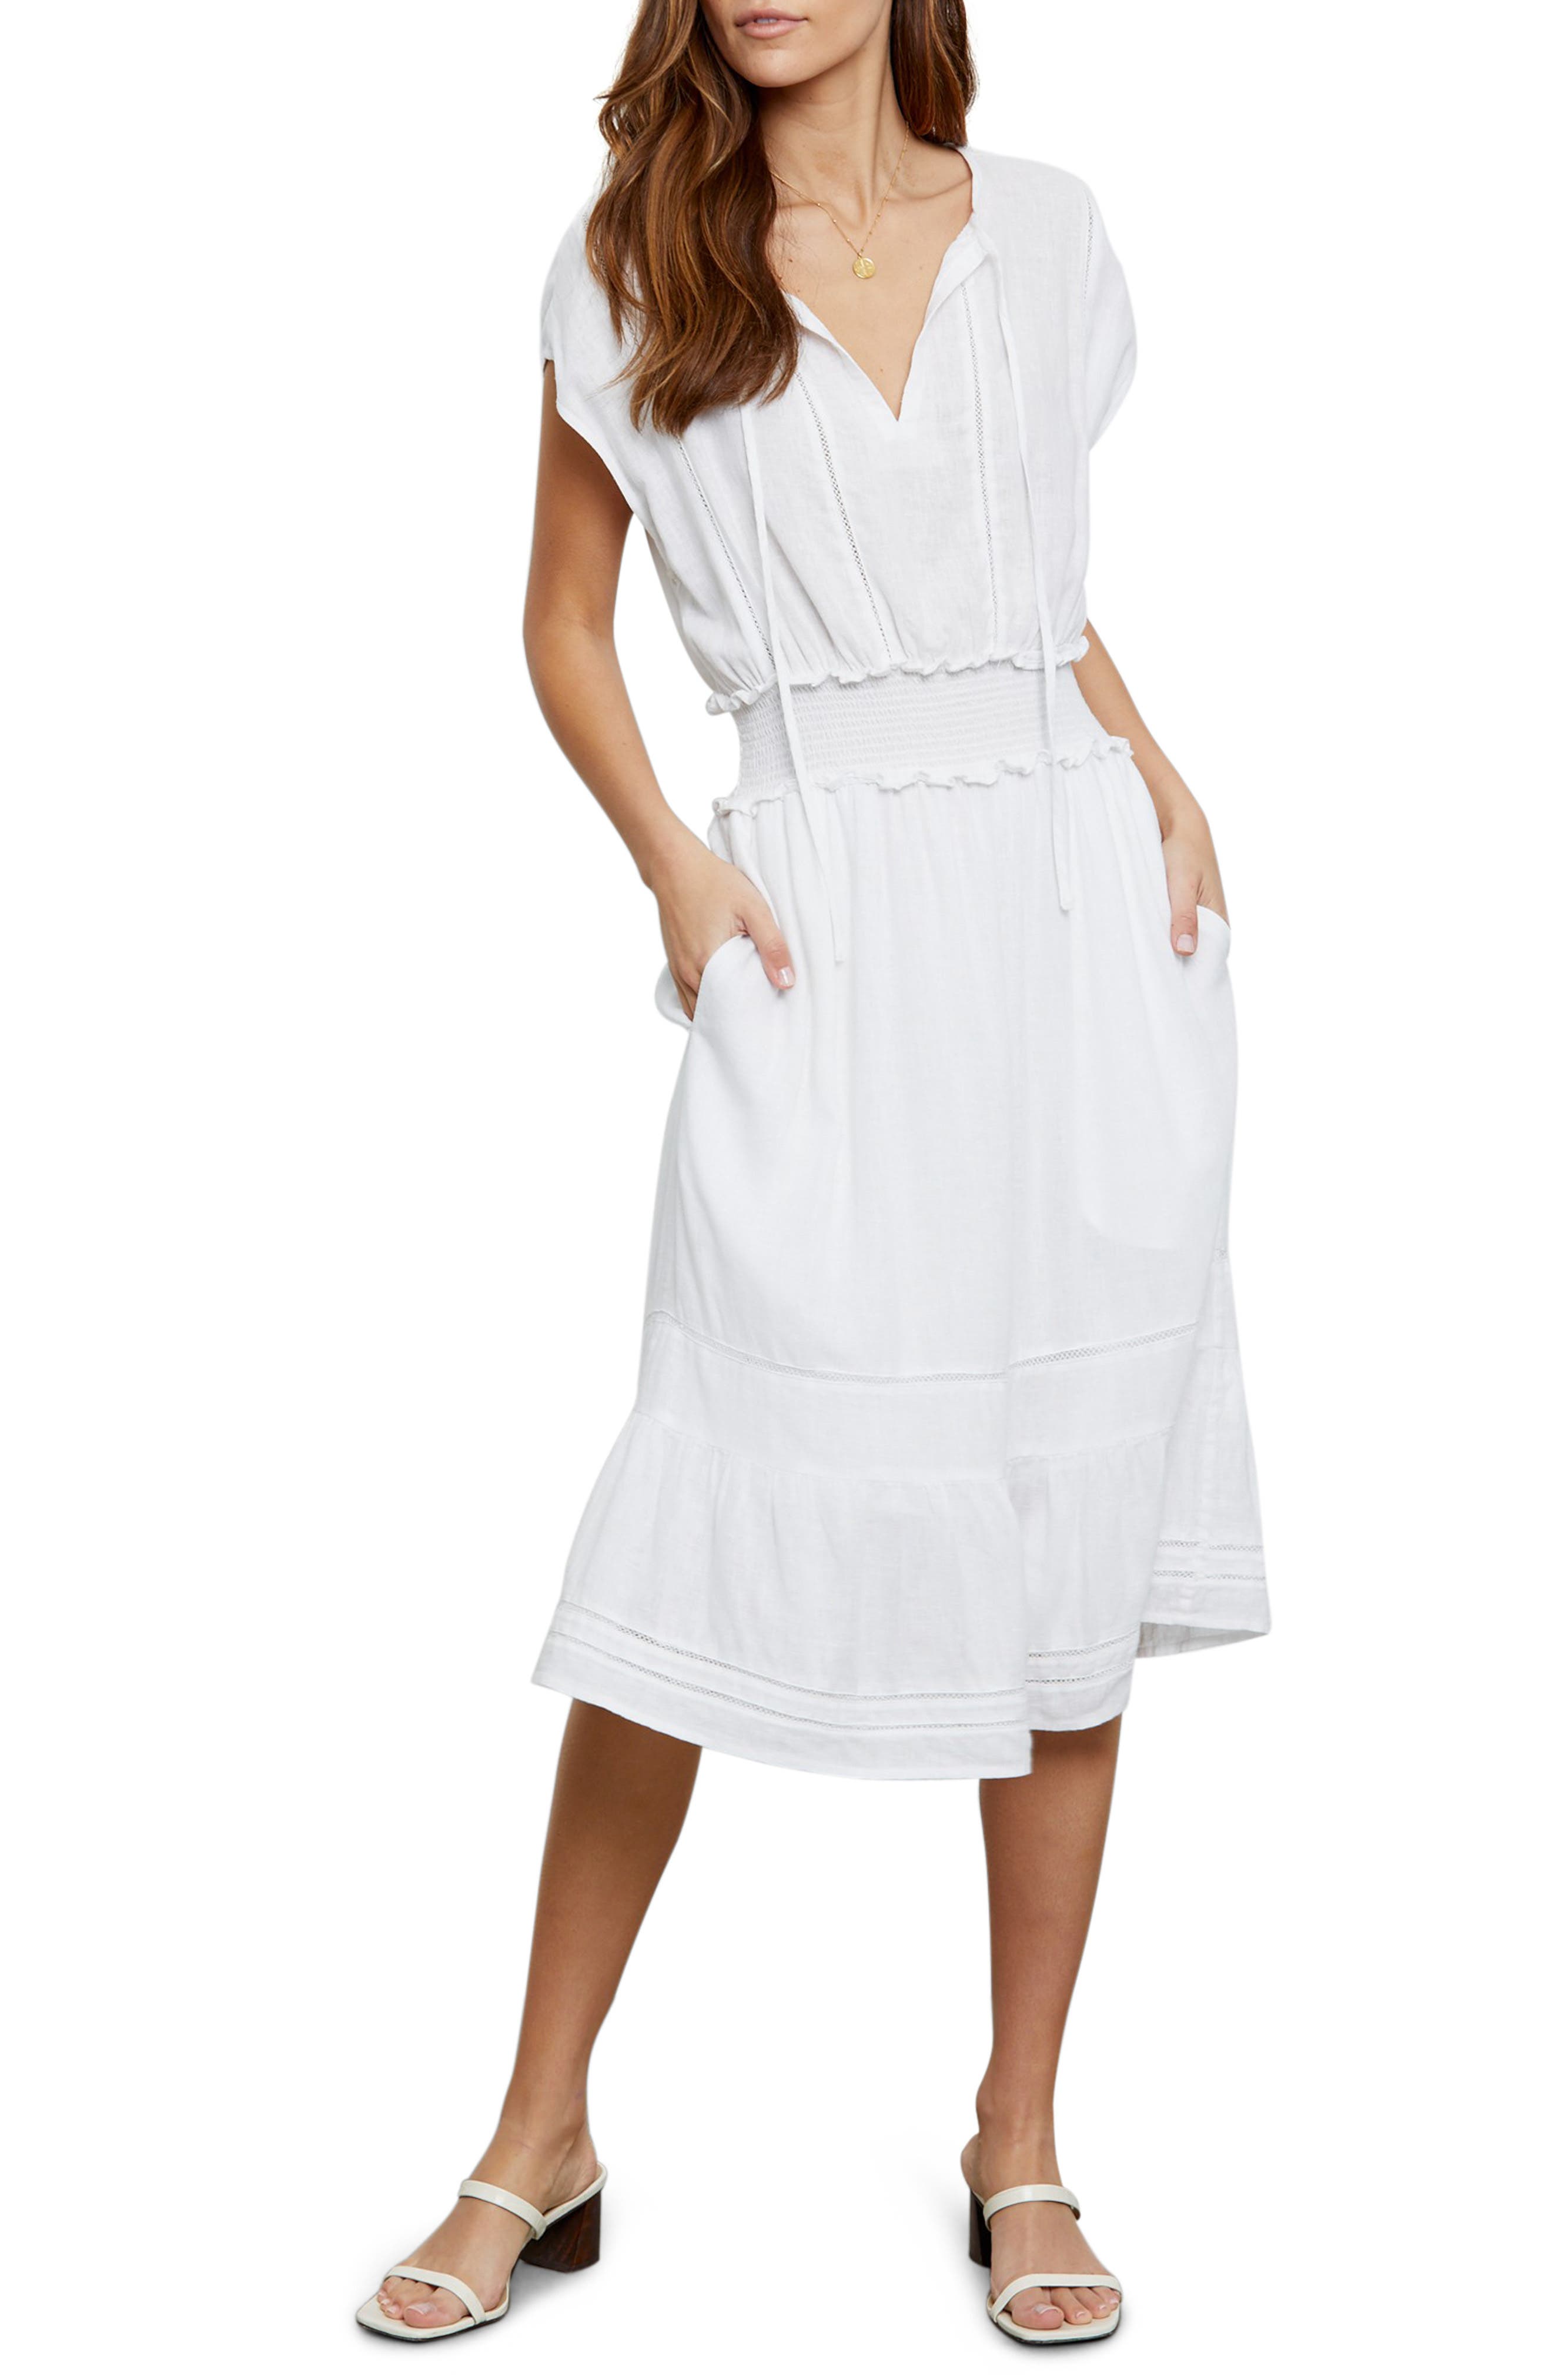 trimmed in Blue satin Off-White Linen Blend Dress with Lower back